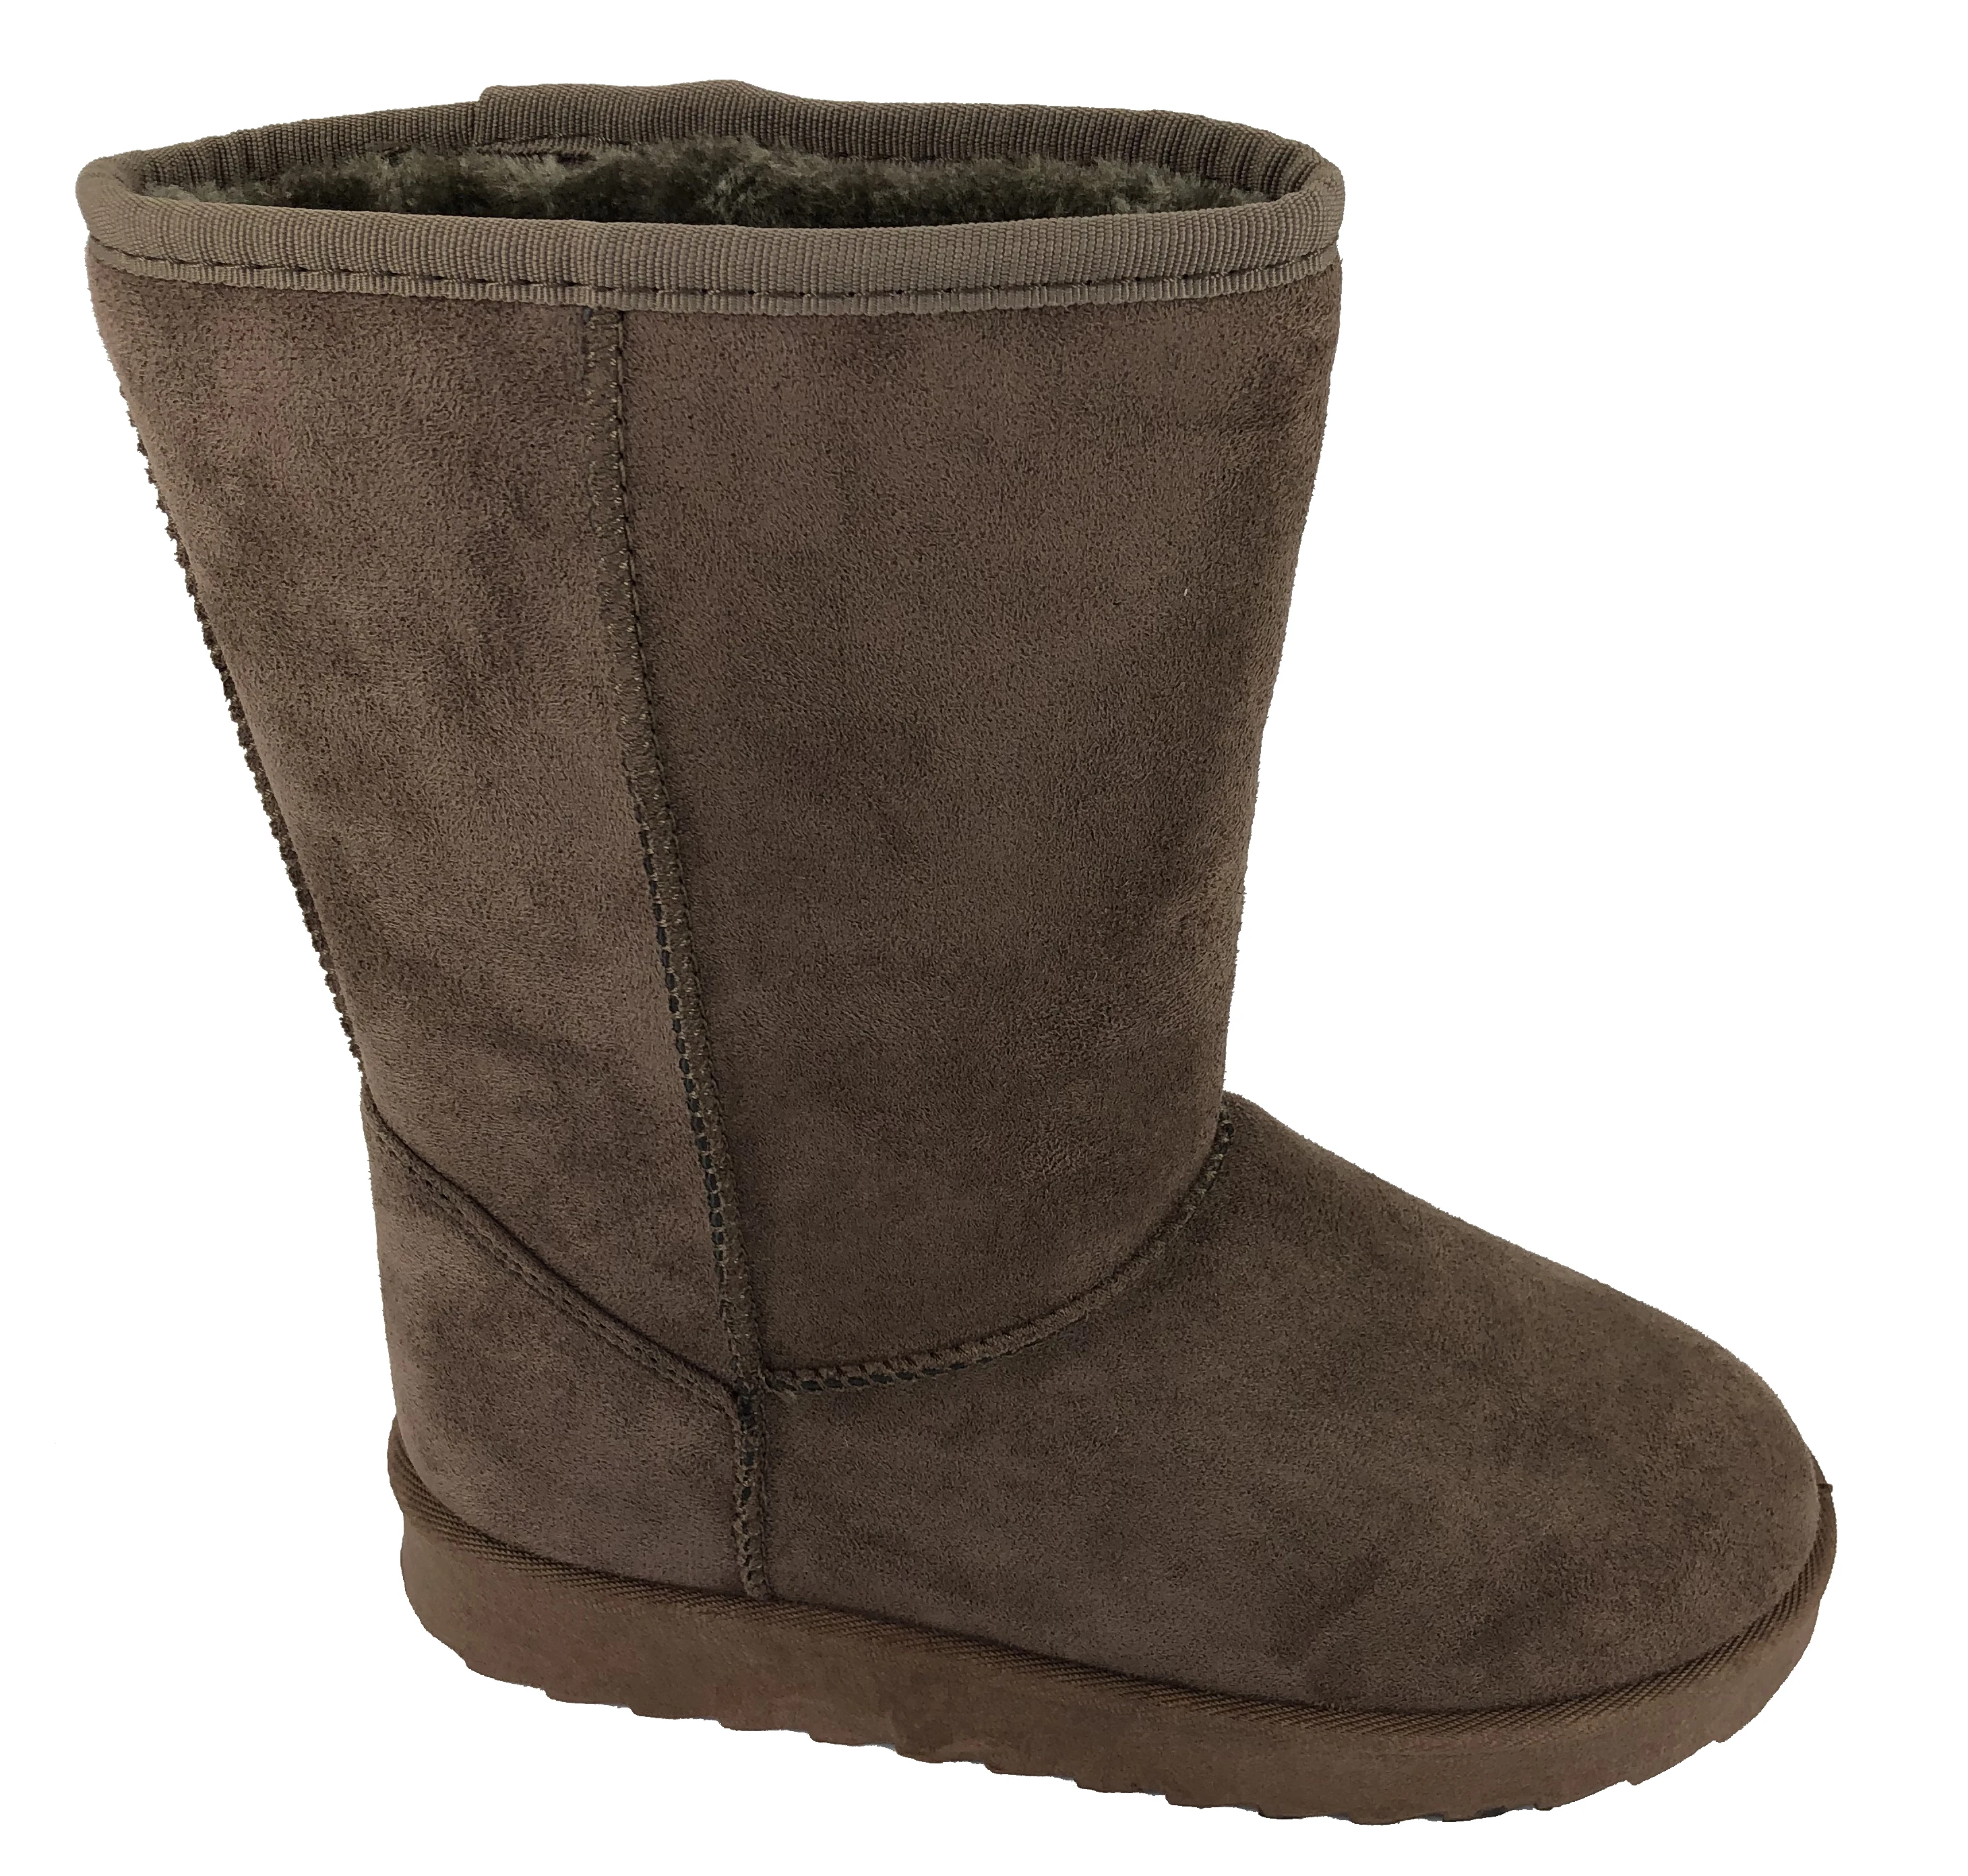 19548 Australian boot taupe color made of serraje, interior lining of hair with flexible sole and flat floor